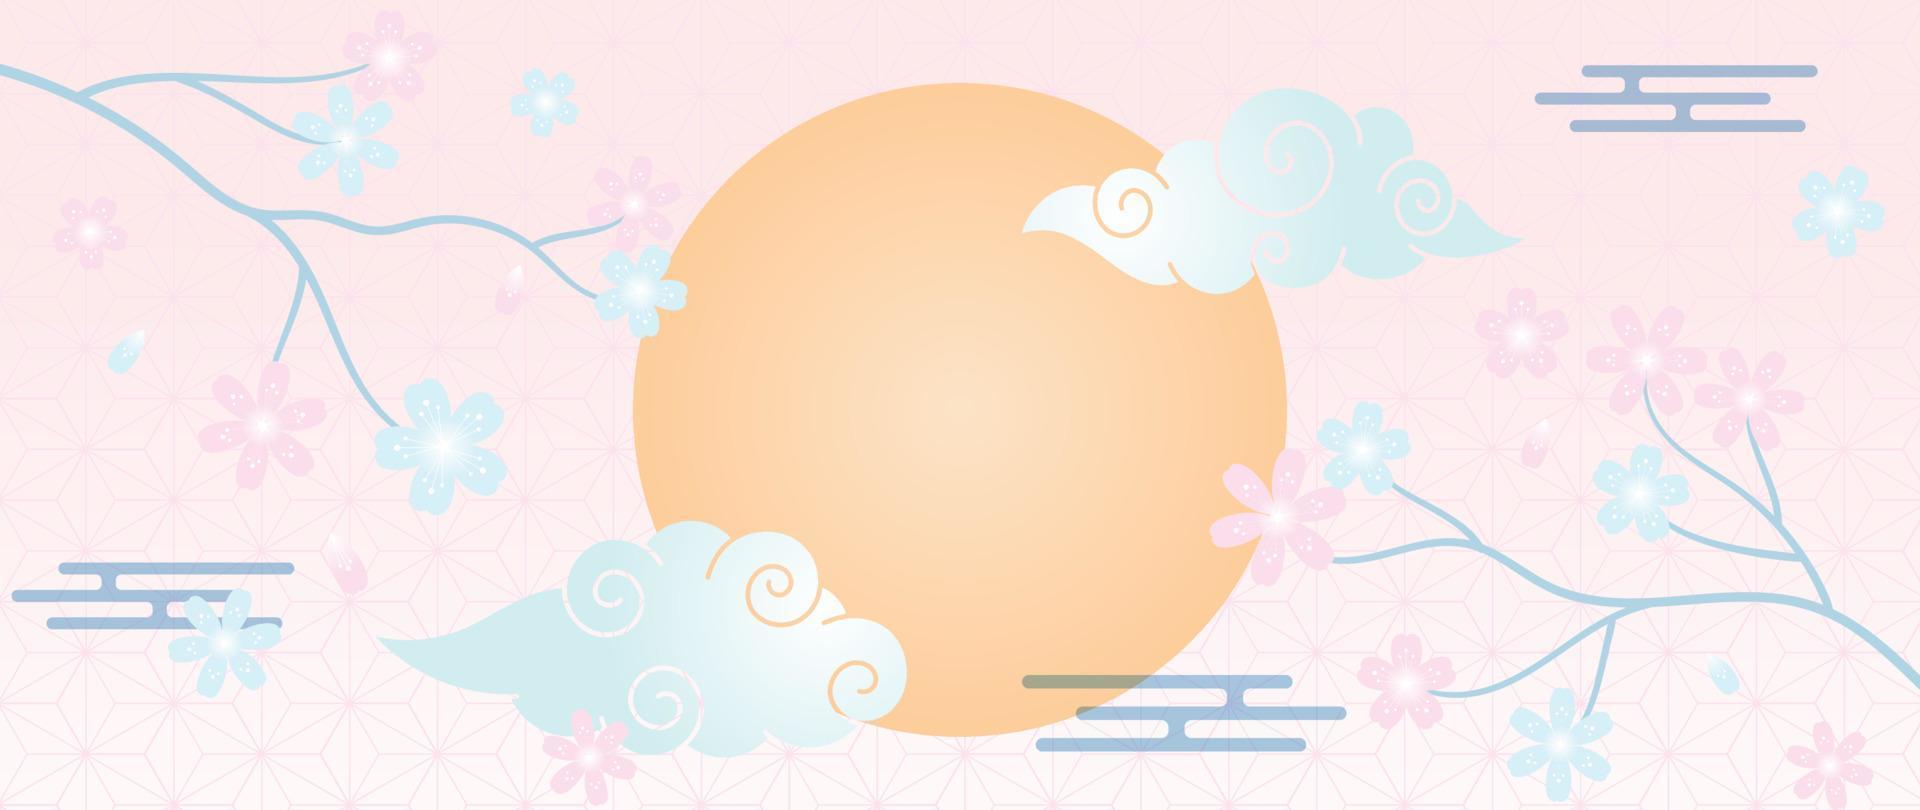 Japanese background vector illustration. Happy new year card decoration template in pastel oriental japanese pattern style with moon, cloud and cherry blossom. Design for wallpaper, poster, banner.